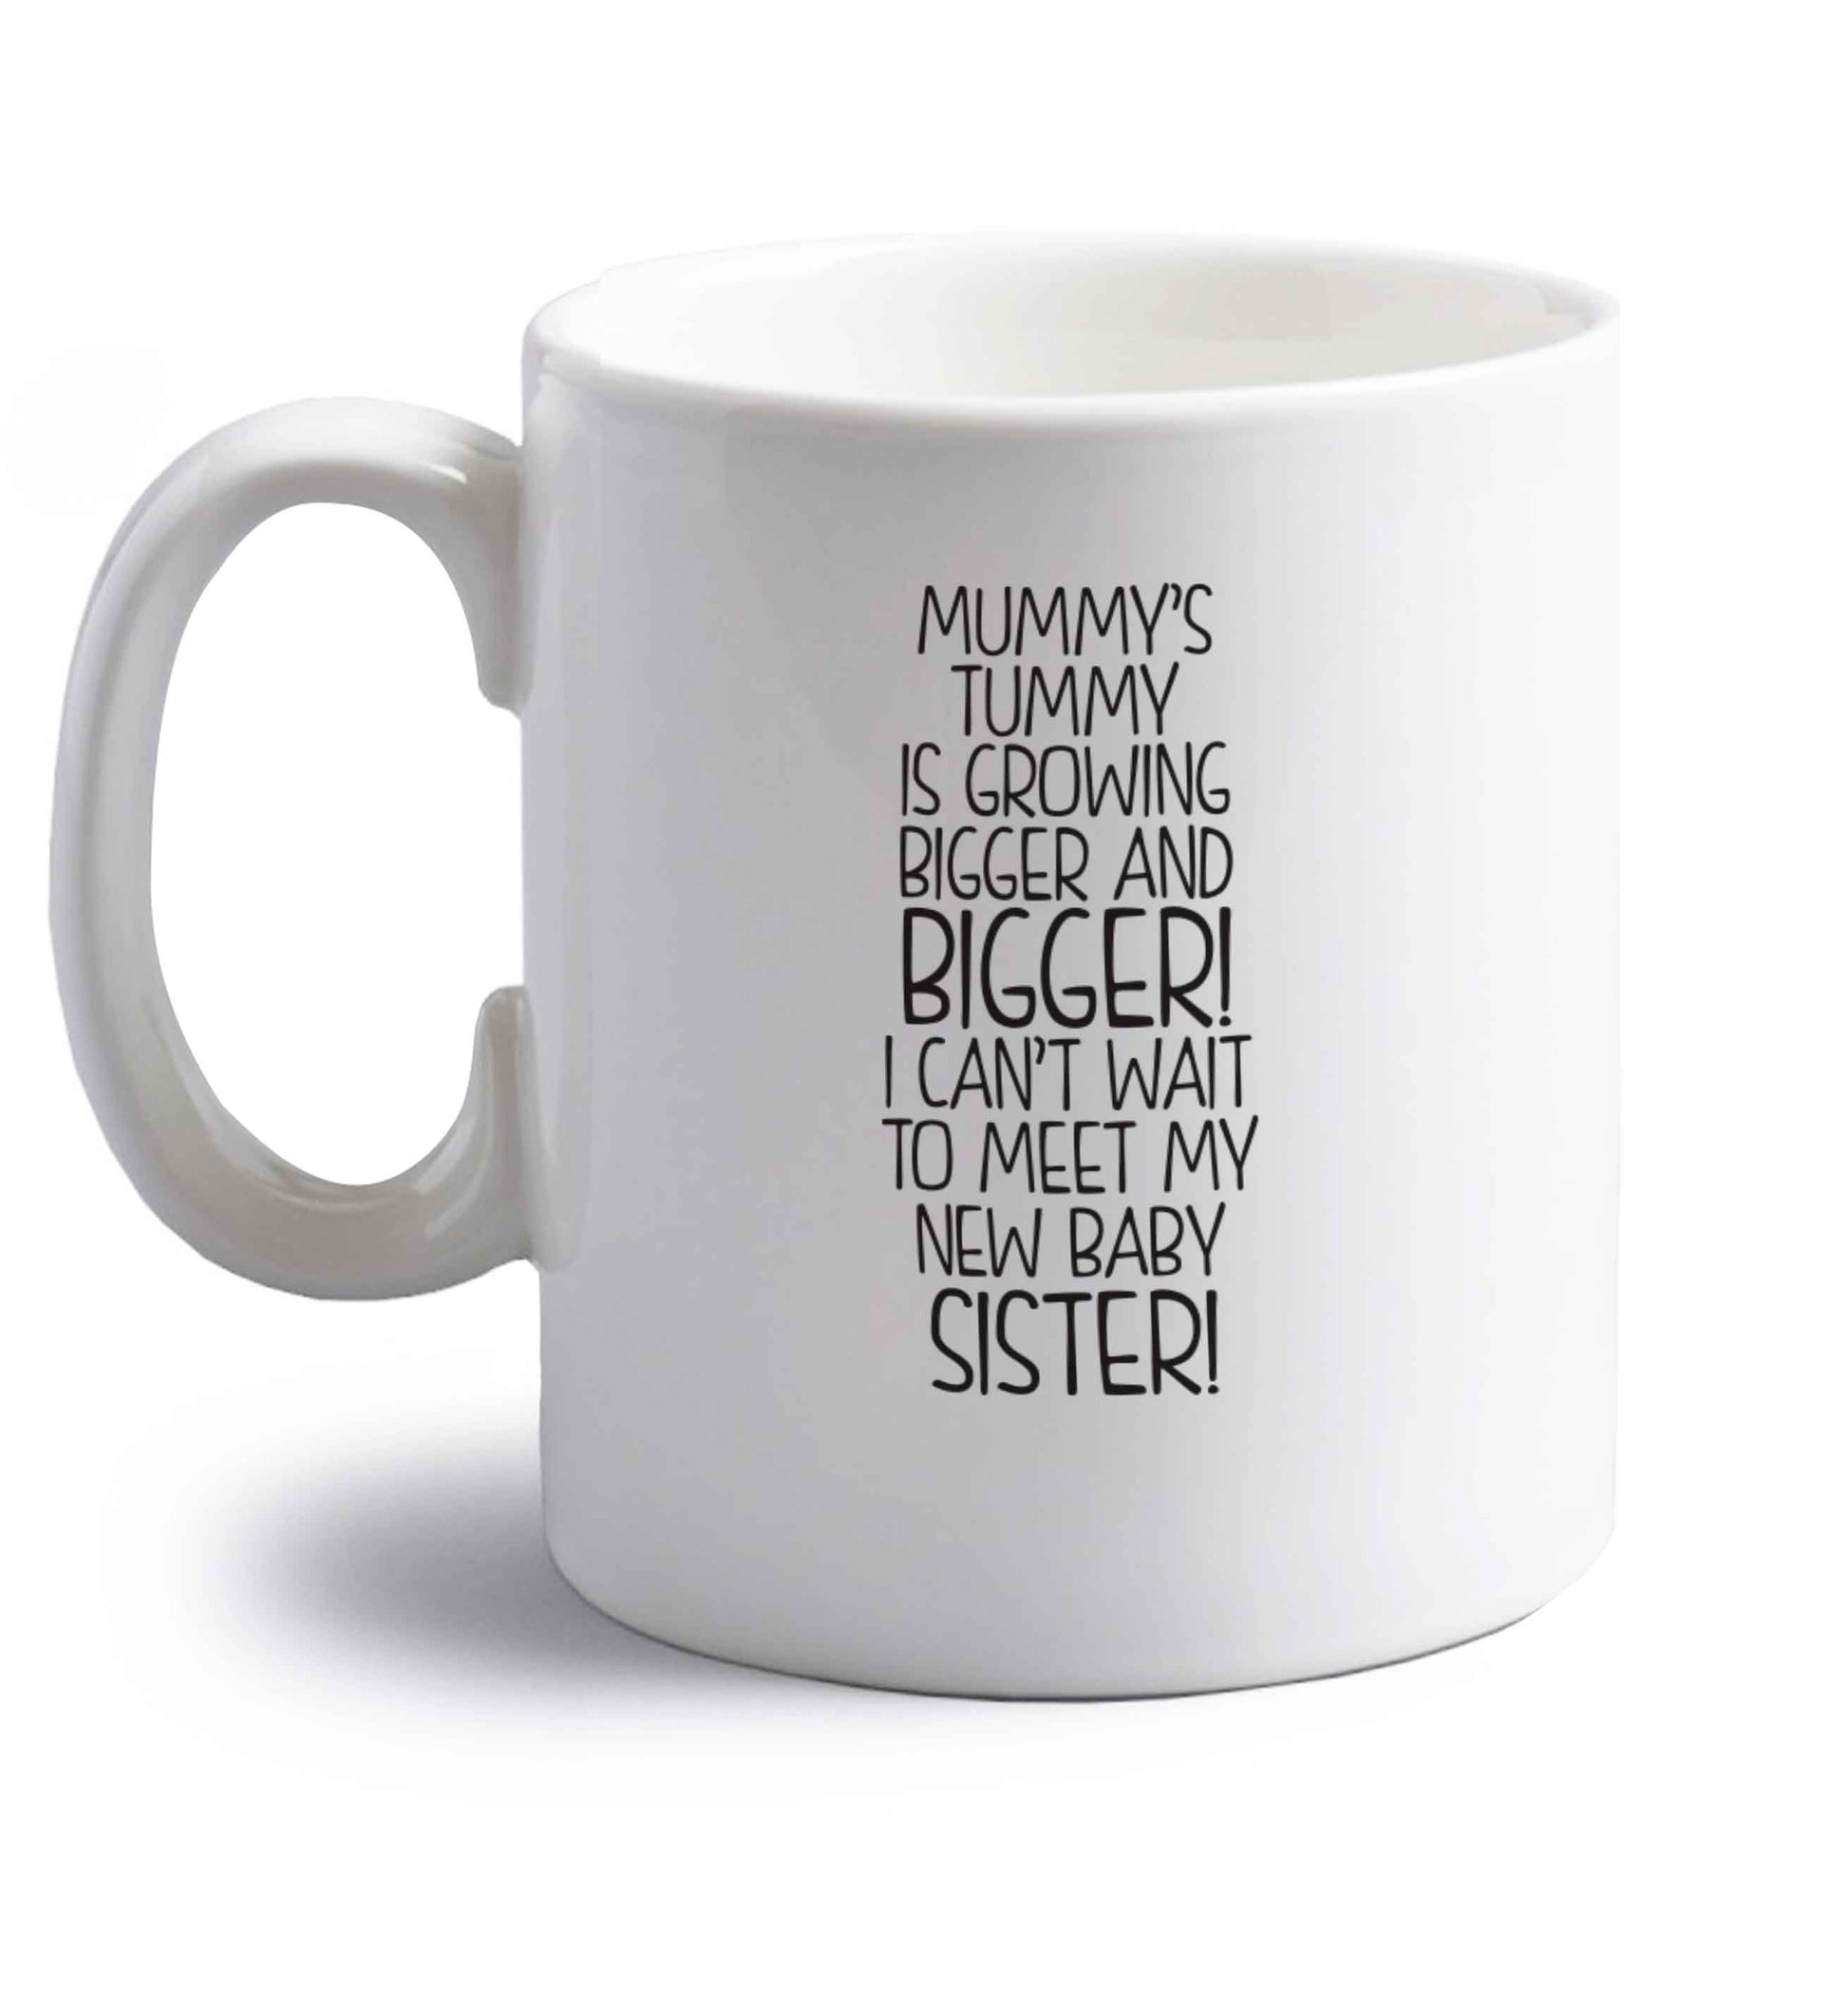 Mummy's tummy is growing bigger and bigger I can't wait to meet my new baby sister! right handed white ceramic mug 